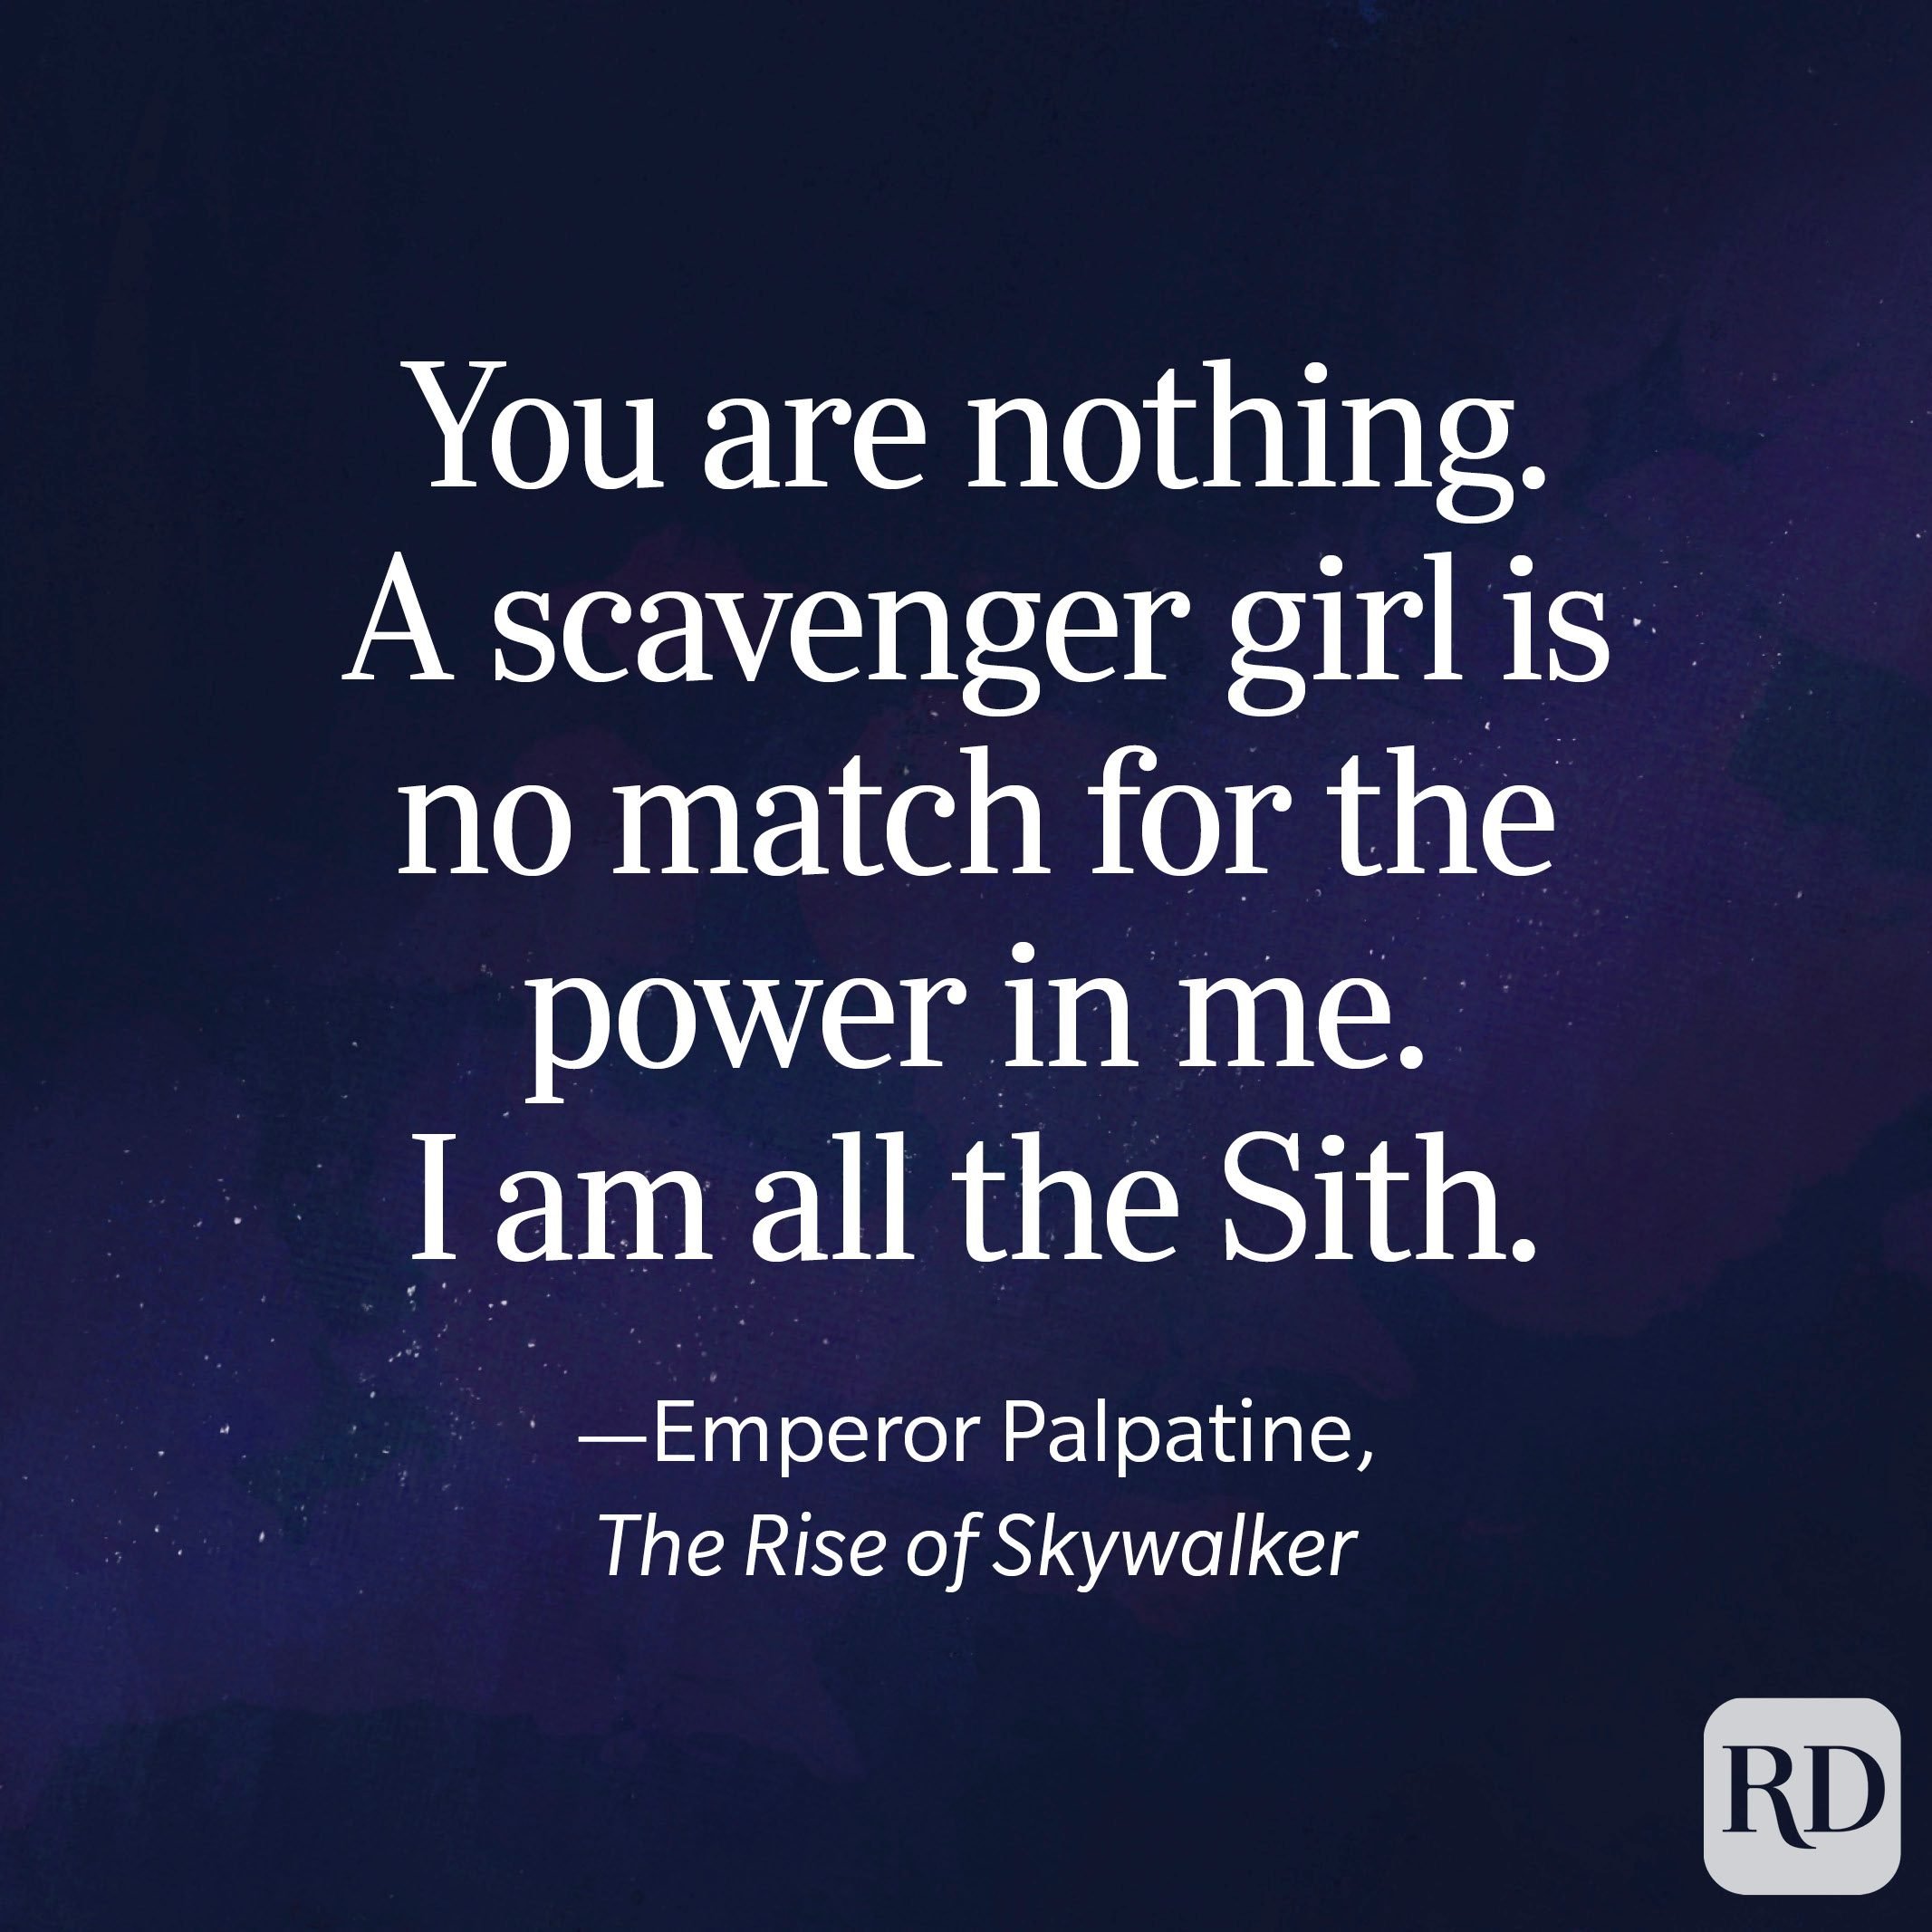 Star Wars: A look at some of Darth Vader's most iconic quotes in